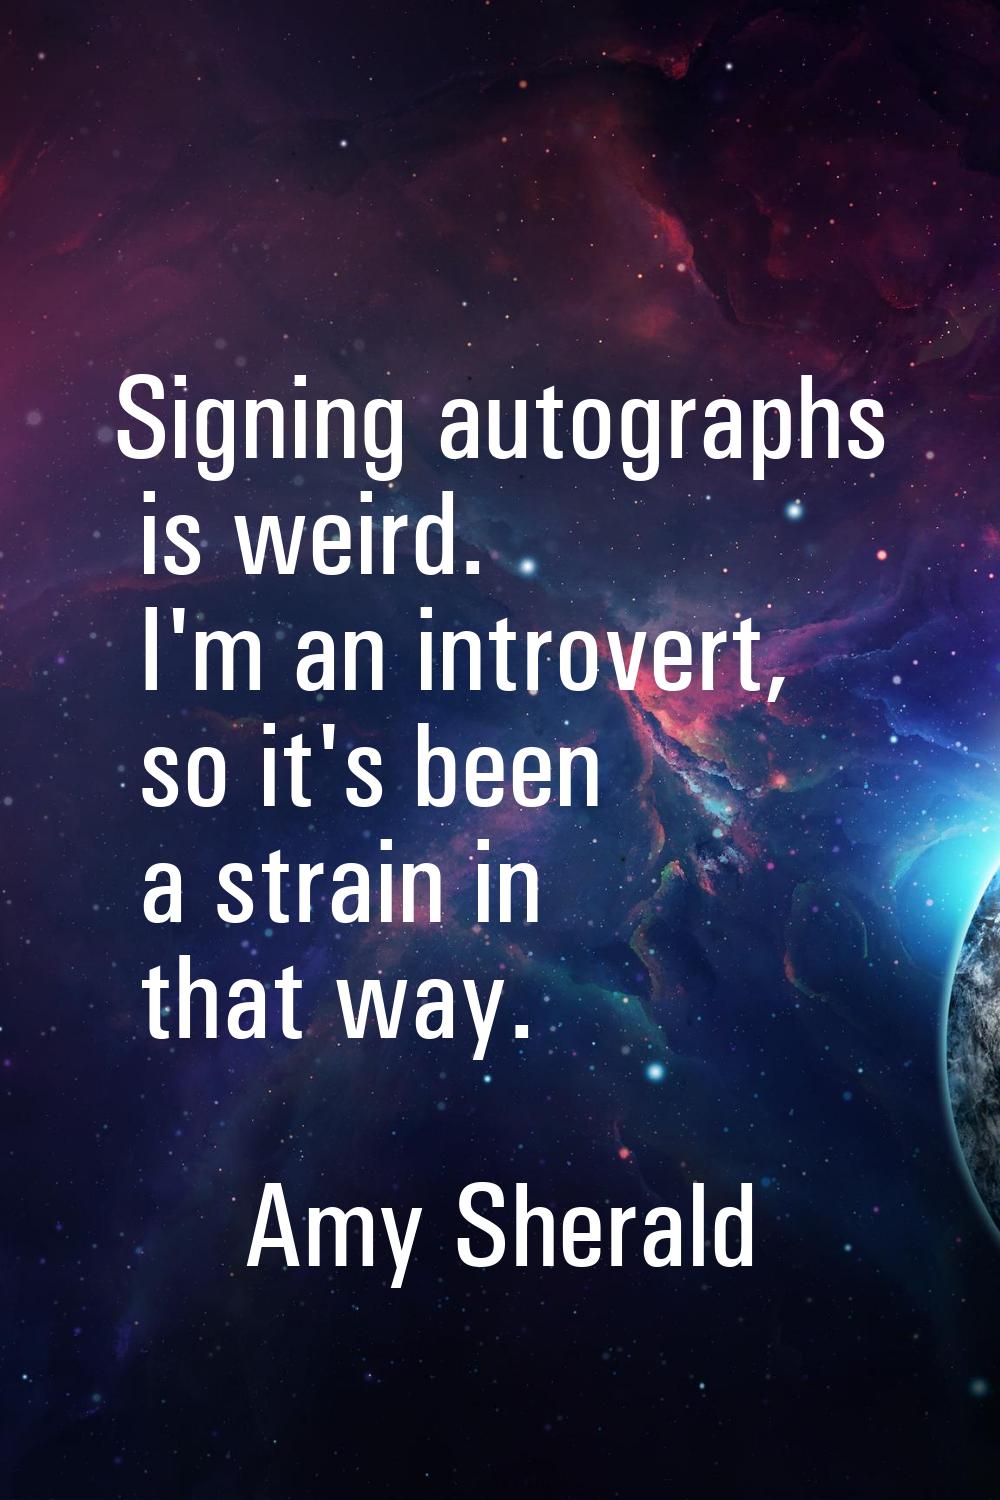 Signing autographs is weird. I'm an introvert, so it's been a strain in that way.